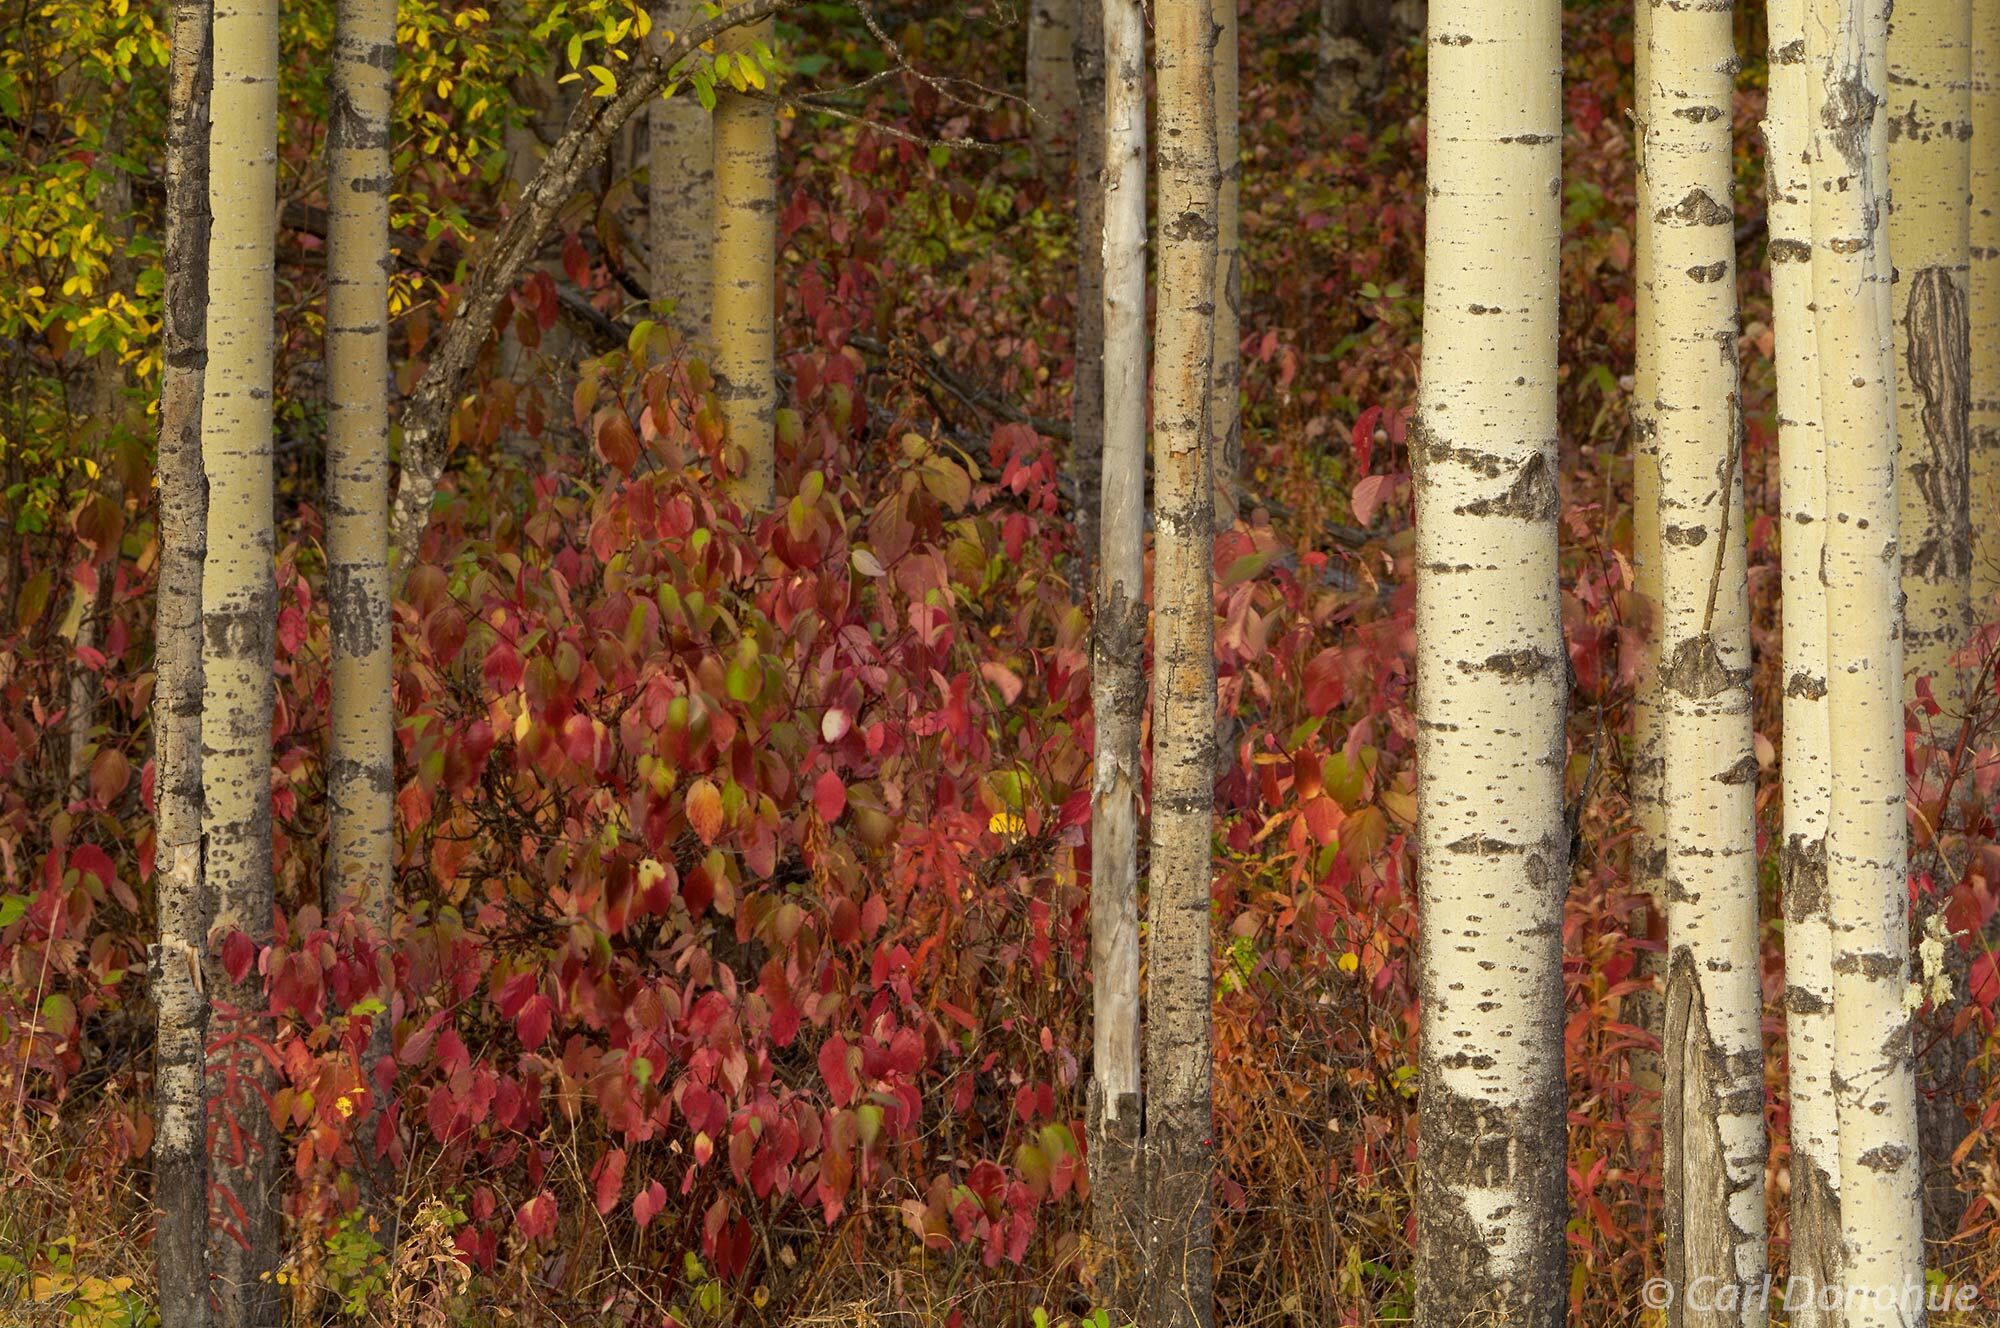 Aspen, a nice red understory, autumn and color! Fall colors glow in mid-September, in British Columbia, Canada.